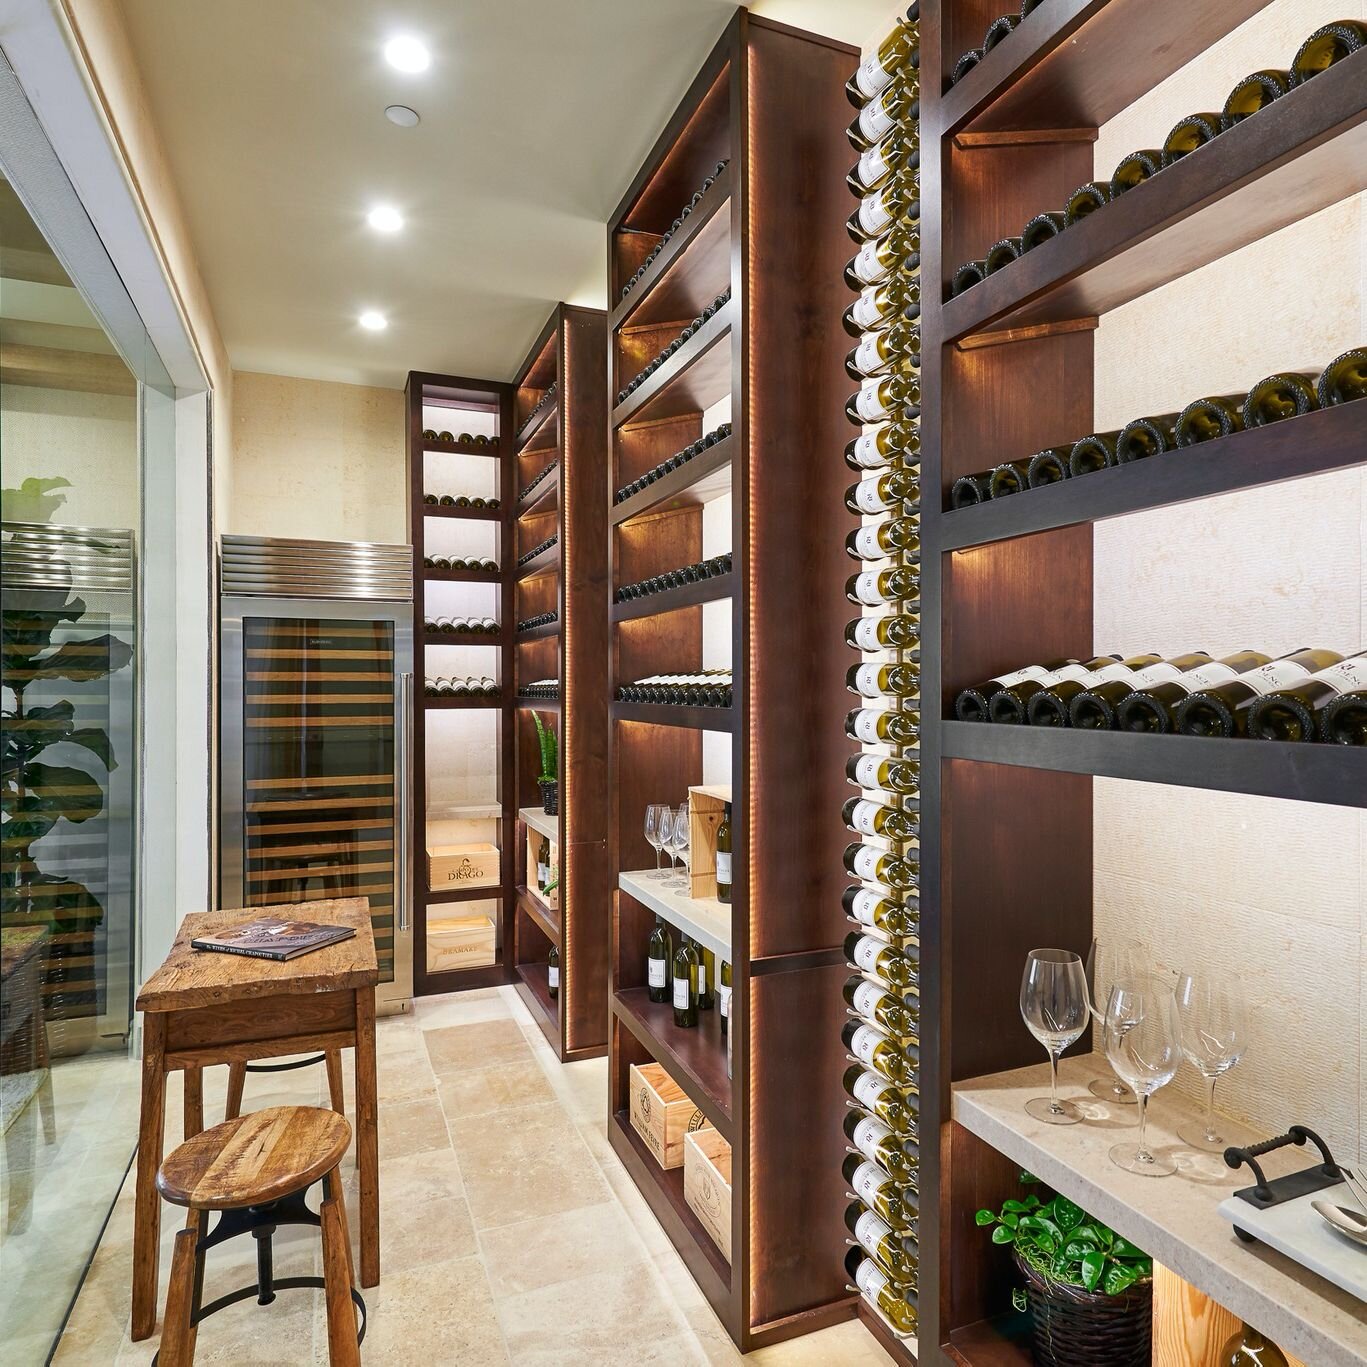 You had me at Merlot.

An entirely custom refrigerated wine cellar designed for this home. Perfect for the &quot;occasional&quot; wine drinker. Or wine connoisseur 😉

#winelover #winestorage #winecellar #winewinewine #luxuryhome #modernhome #homeswe